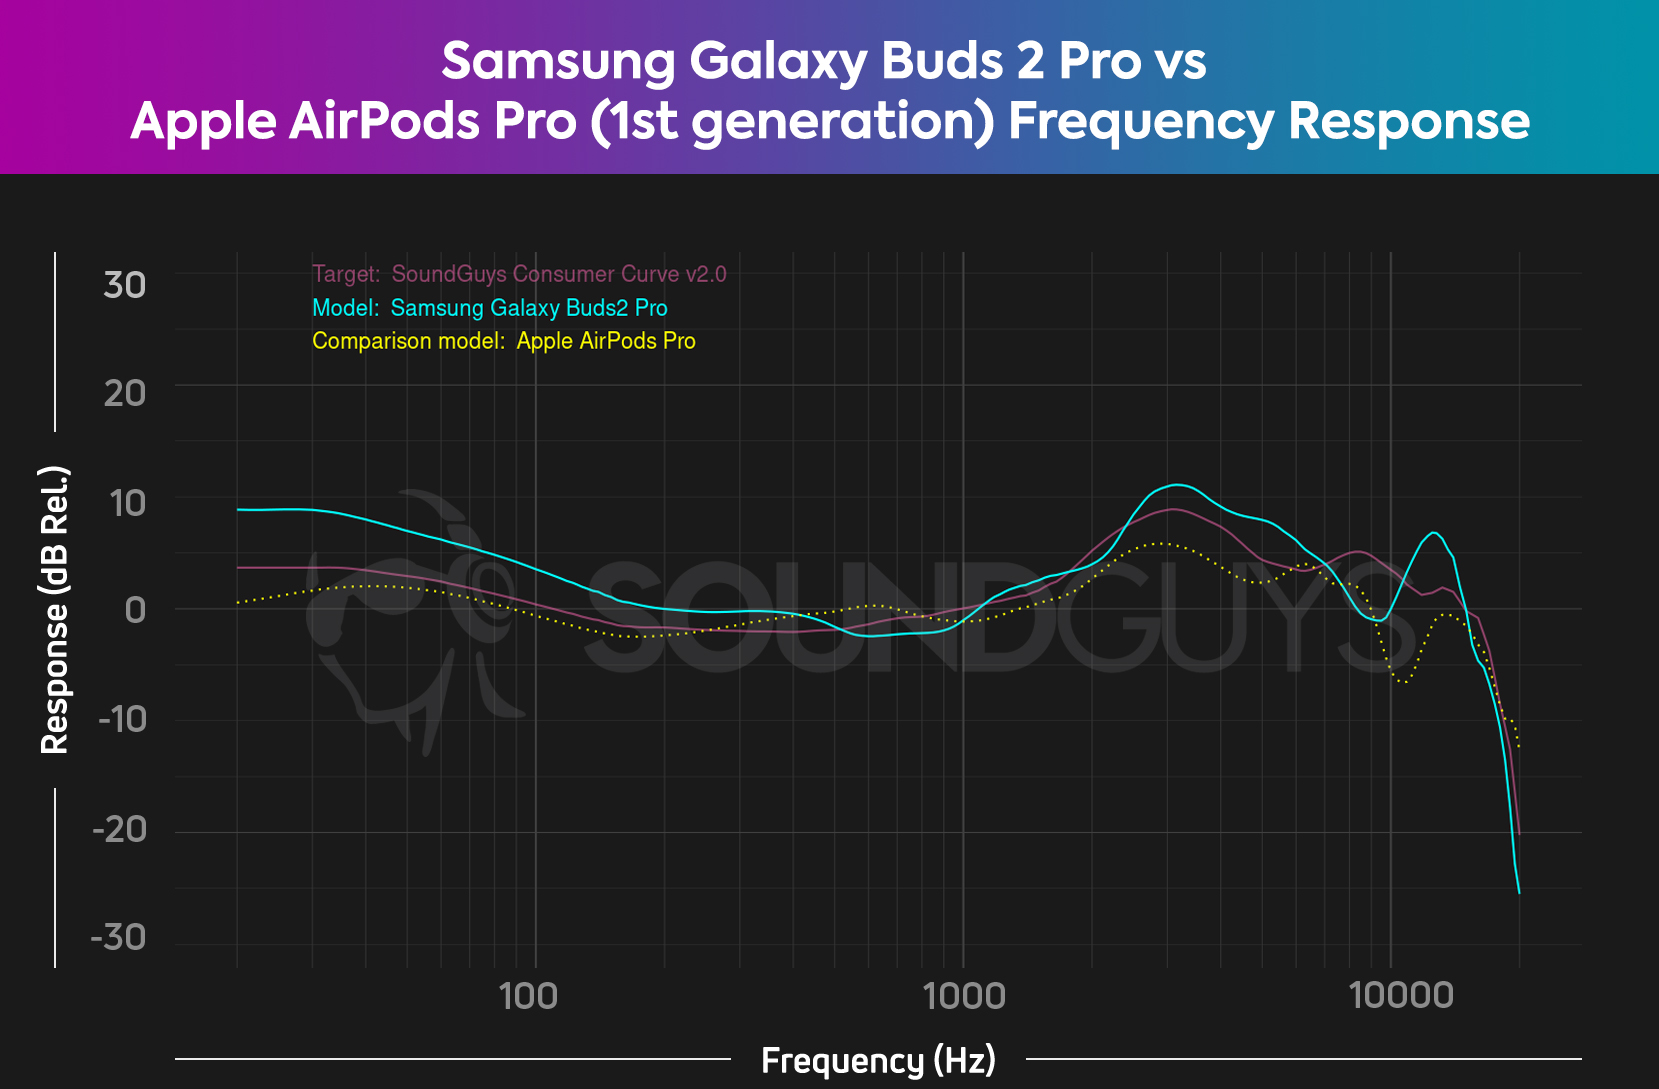 The frequency response comparison chart for the Samsung Galaxy Buds 2 Pro and the Apple AirPods Pro (1st generation), illustrating how much bass heavy the Galaxy Buds 2 Pro is.